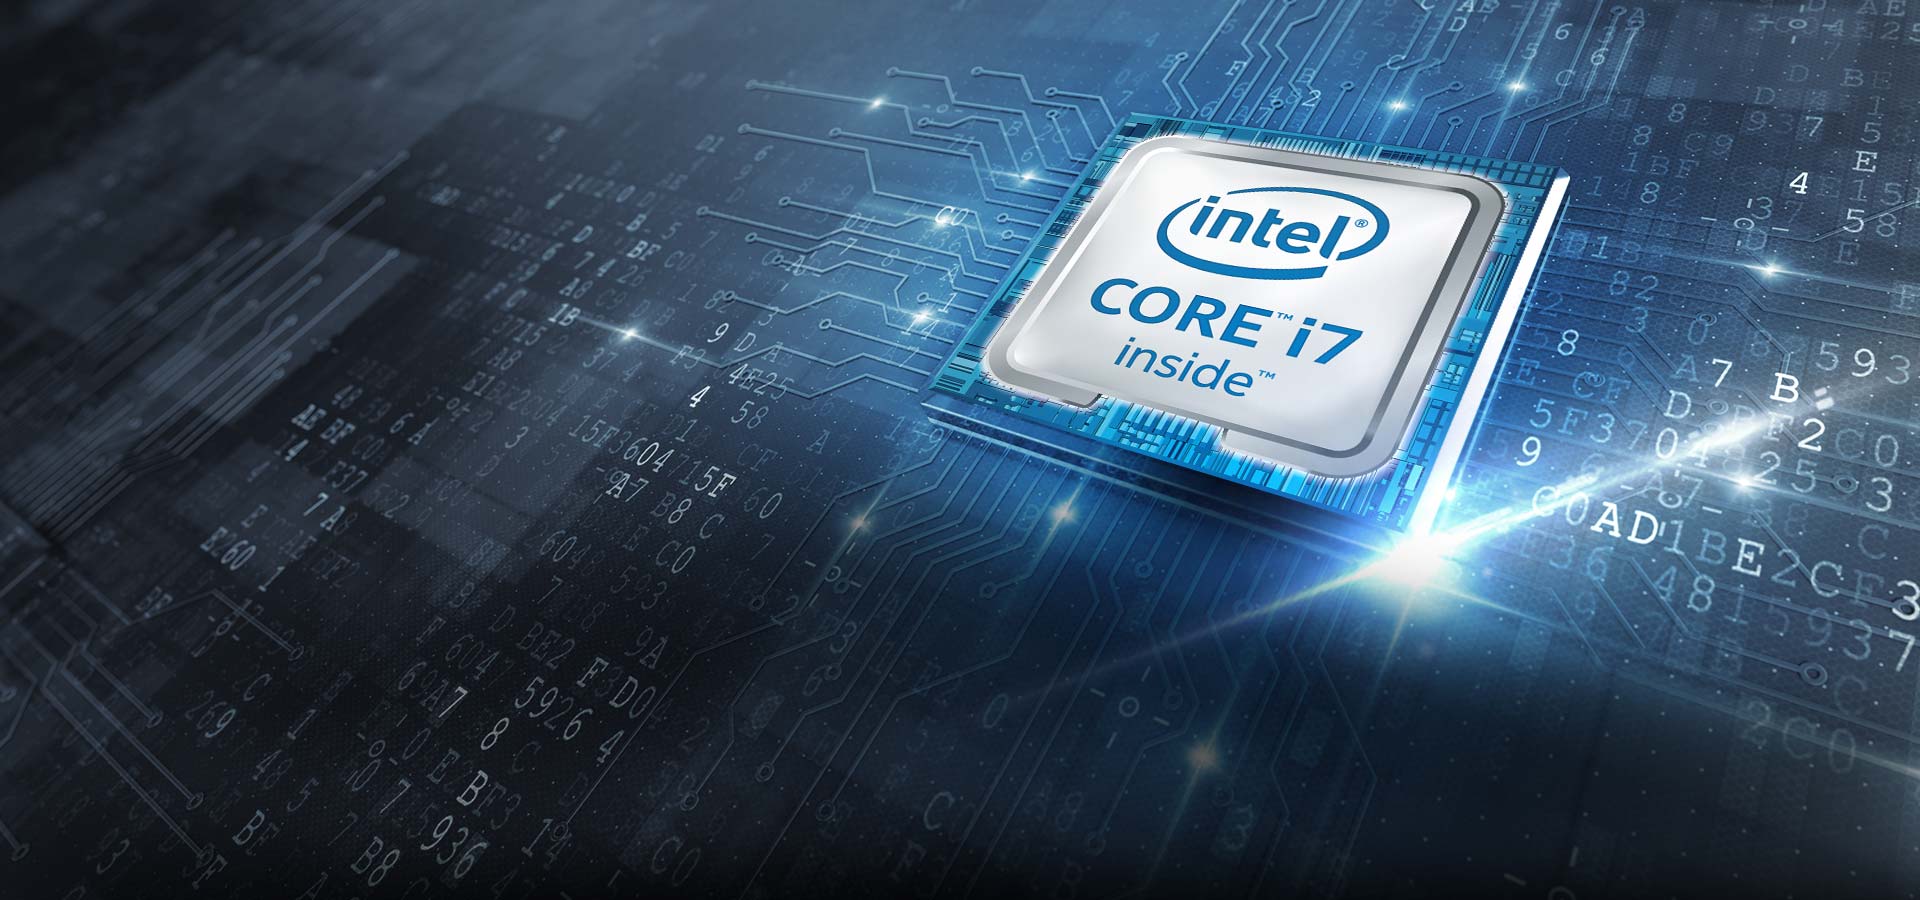 Intel Core I7 Wallpapers Top Free Intel Core I7 Backgrounds Wallpaperaccess